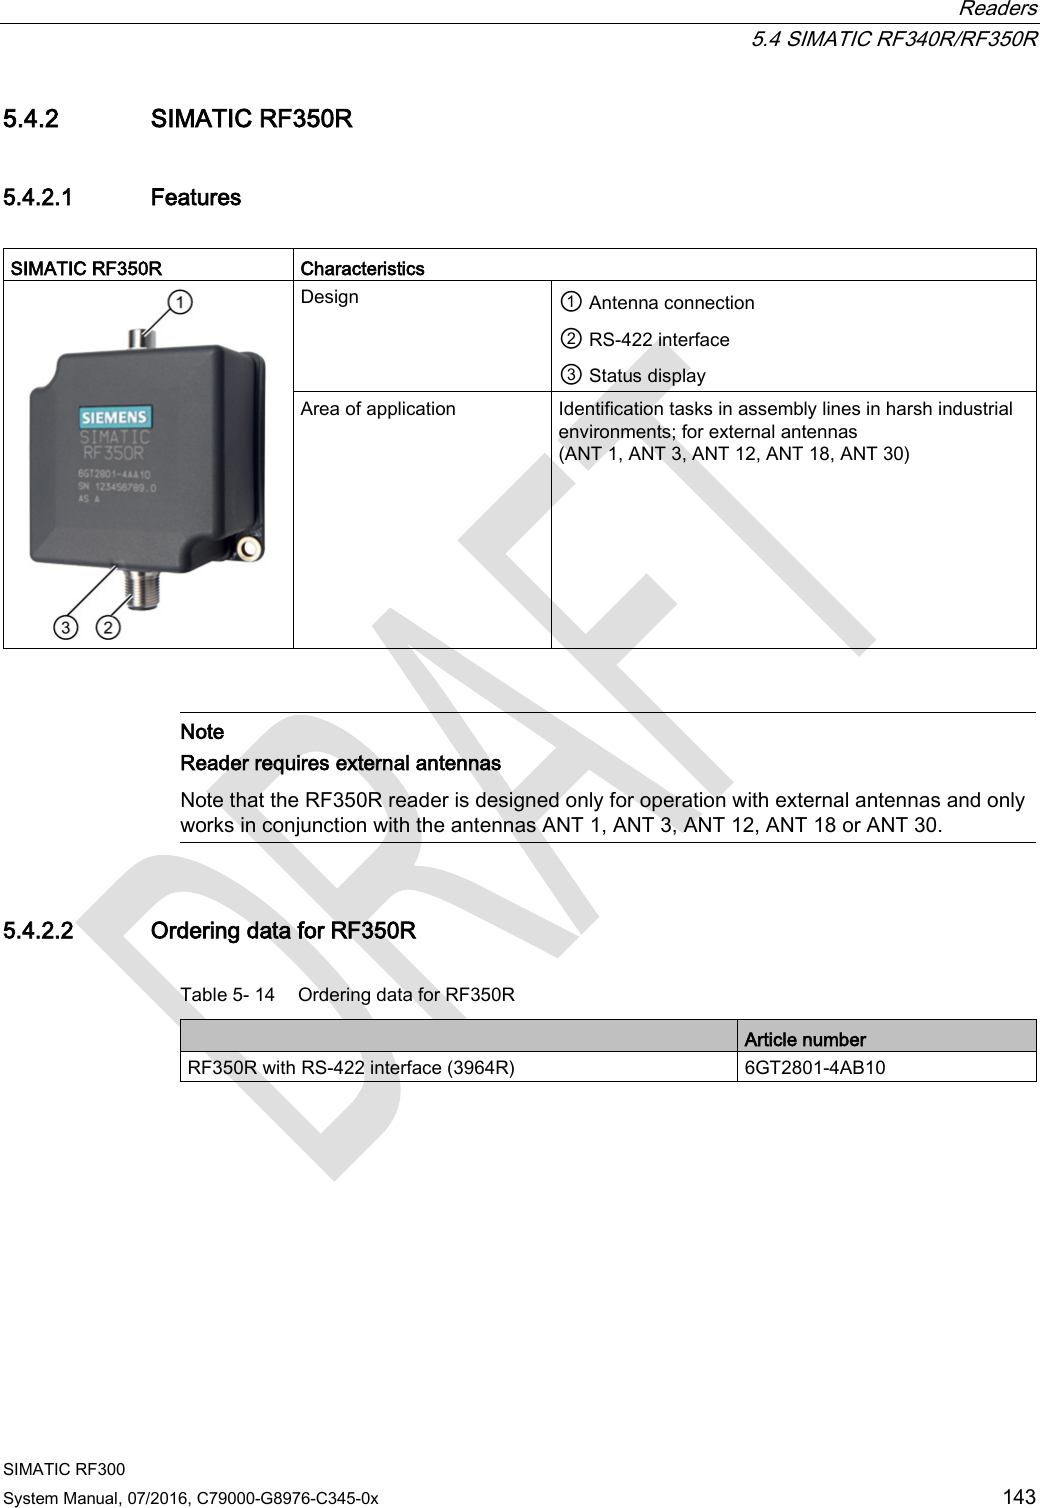  Readers  5.4 SIMATIC RF340R/RF350R SIMATIC RF300 System Manual, 07/2016, C79000-G8976-C345-0x 143 5.4.2 SIMATIC RF350R 5.4.2.1 Features  SIMATIC RF350R  Characteristics  Design ① Antenna connection  ② RS-422 interface ③ Status display Area of application Identification tasks in assembly lines in harsh industrial environments; for external antennas (ANT 1, ANT 3, ANT 12, ANT 18, ANT 30)    Note Reader requires external antennas Note that the RF350R reader is designed only for operation with external antennas and only works in conjunction with the antennas ANT 1, ANT 3, ANT 12, ANT 18 or ANT 30.  5.4.2.2 Ordering data for RF350R Table 5- 14 Ordering data for RF350R  Article number RF350R with RS-422 interface (3964R) 6GT2801-4AB10 